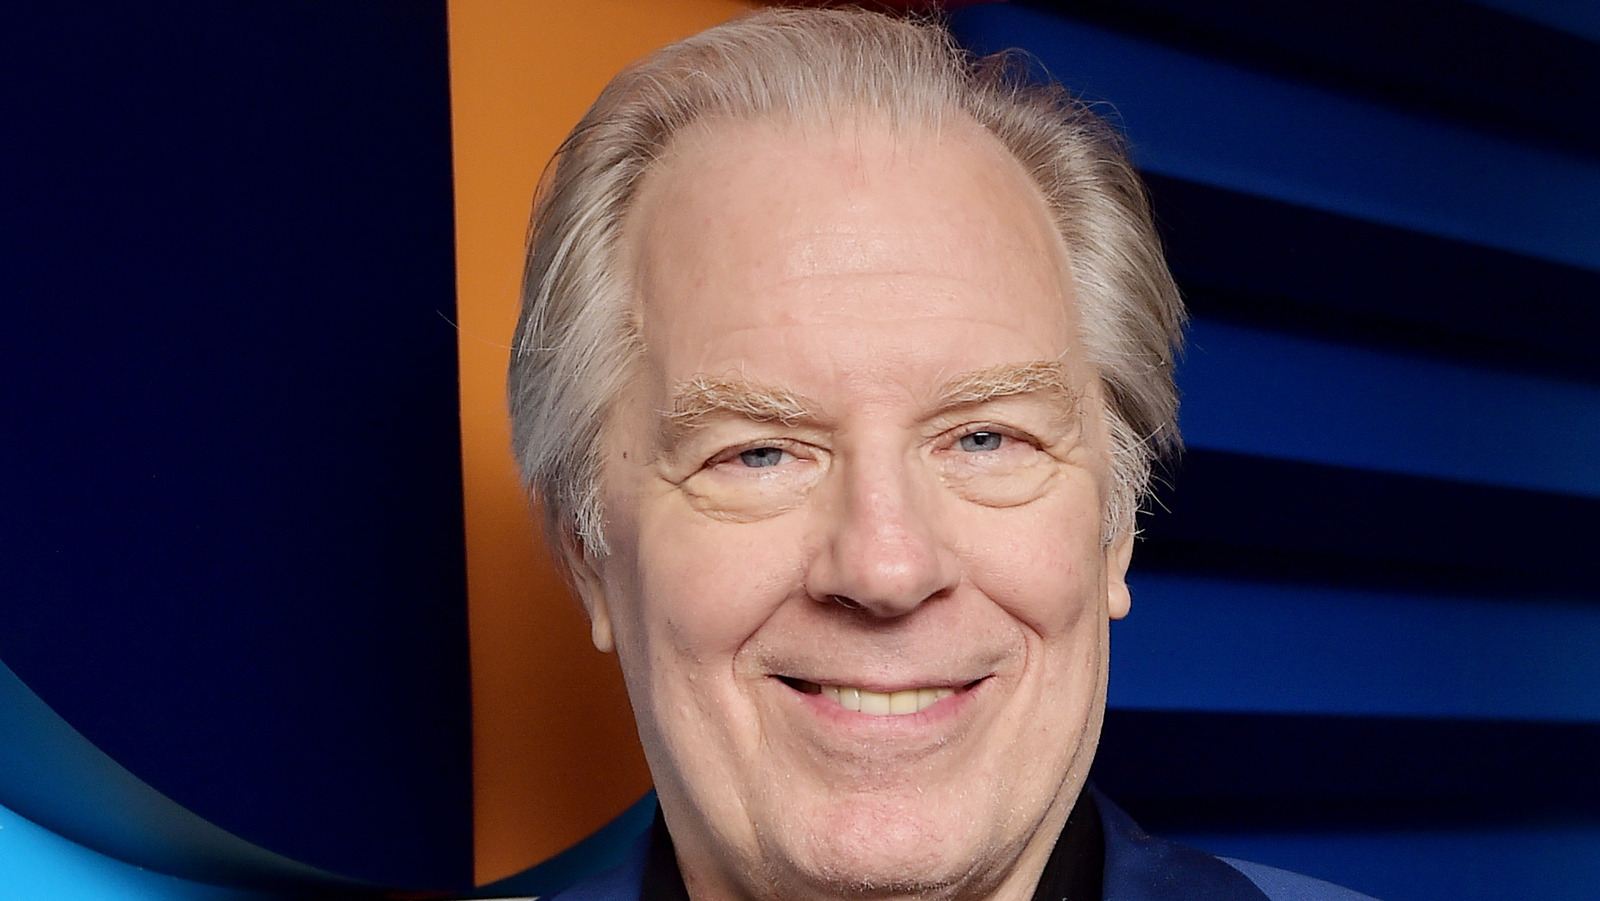 Michael McKean wearing a blue suit and smiling